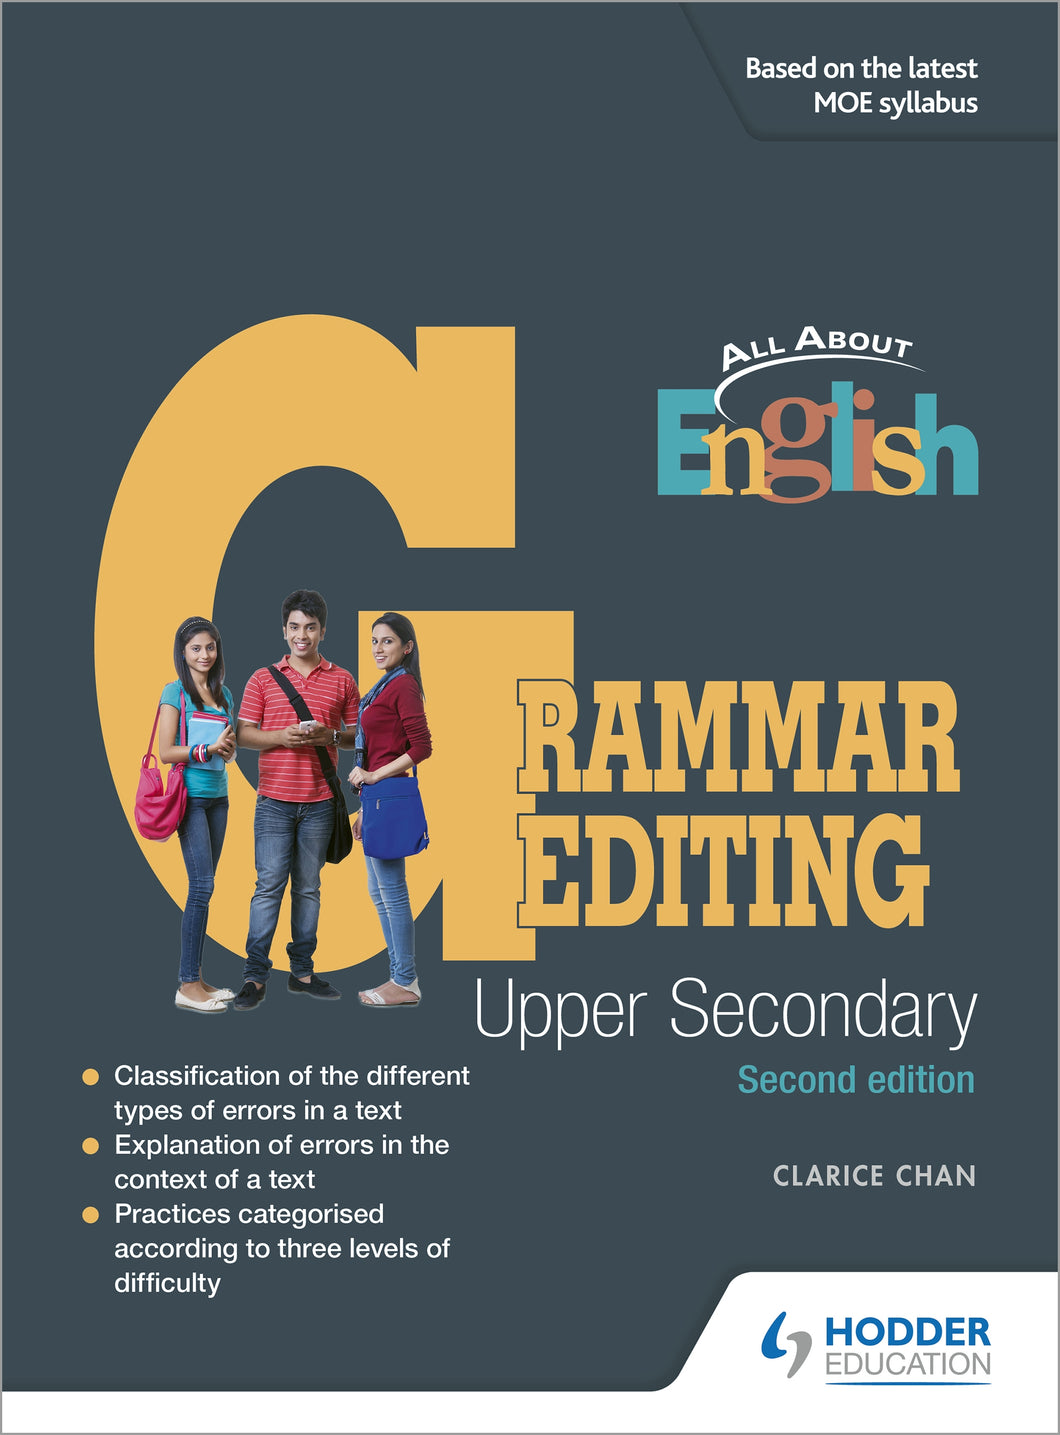 KRSS - English - All About English Grammar Editing for Upper Sec. (Revised Edition) (EXP)